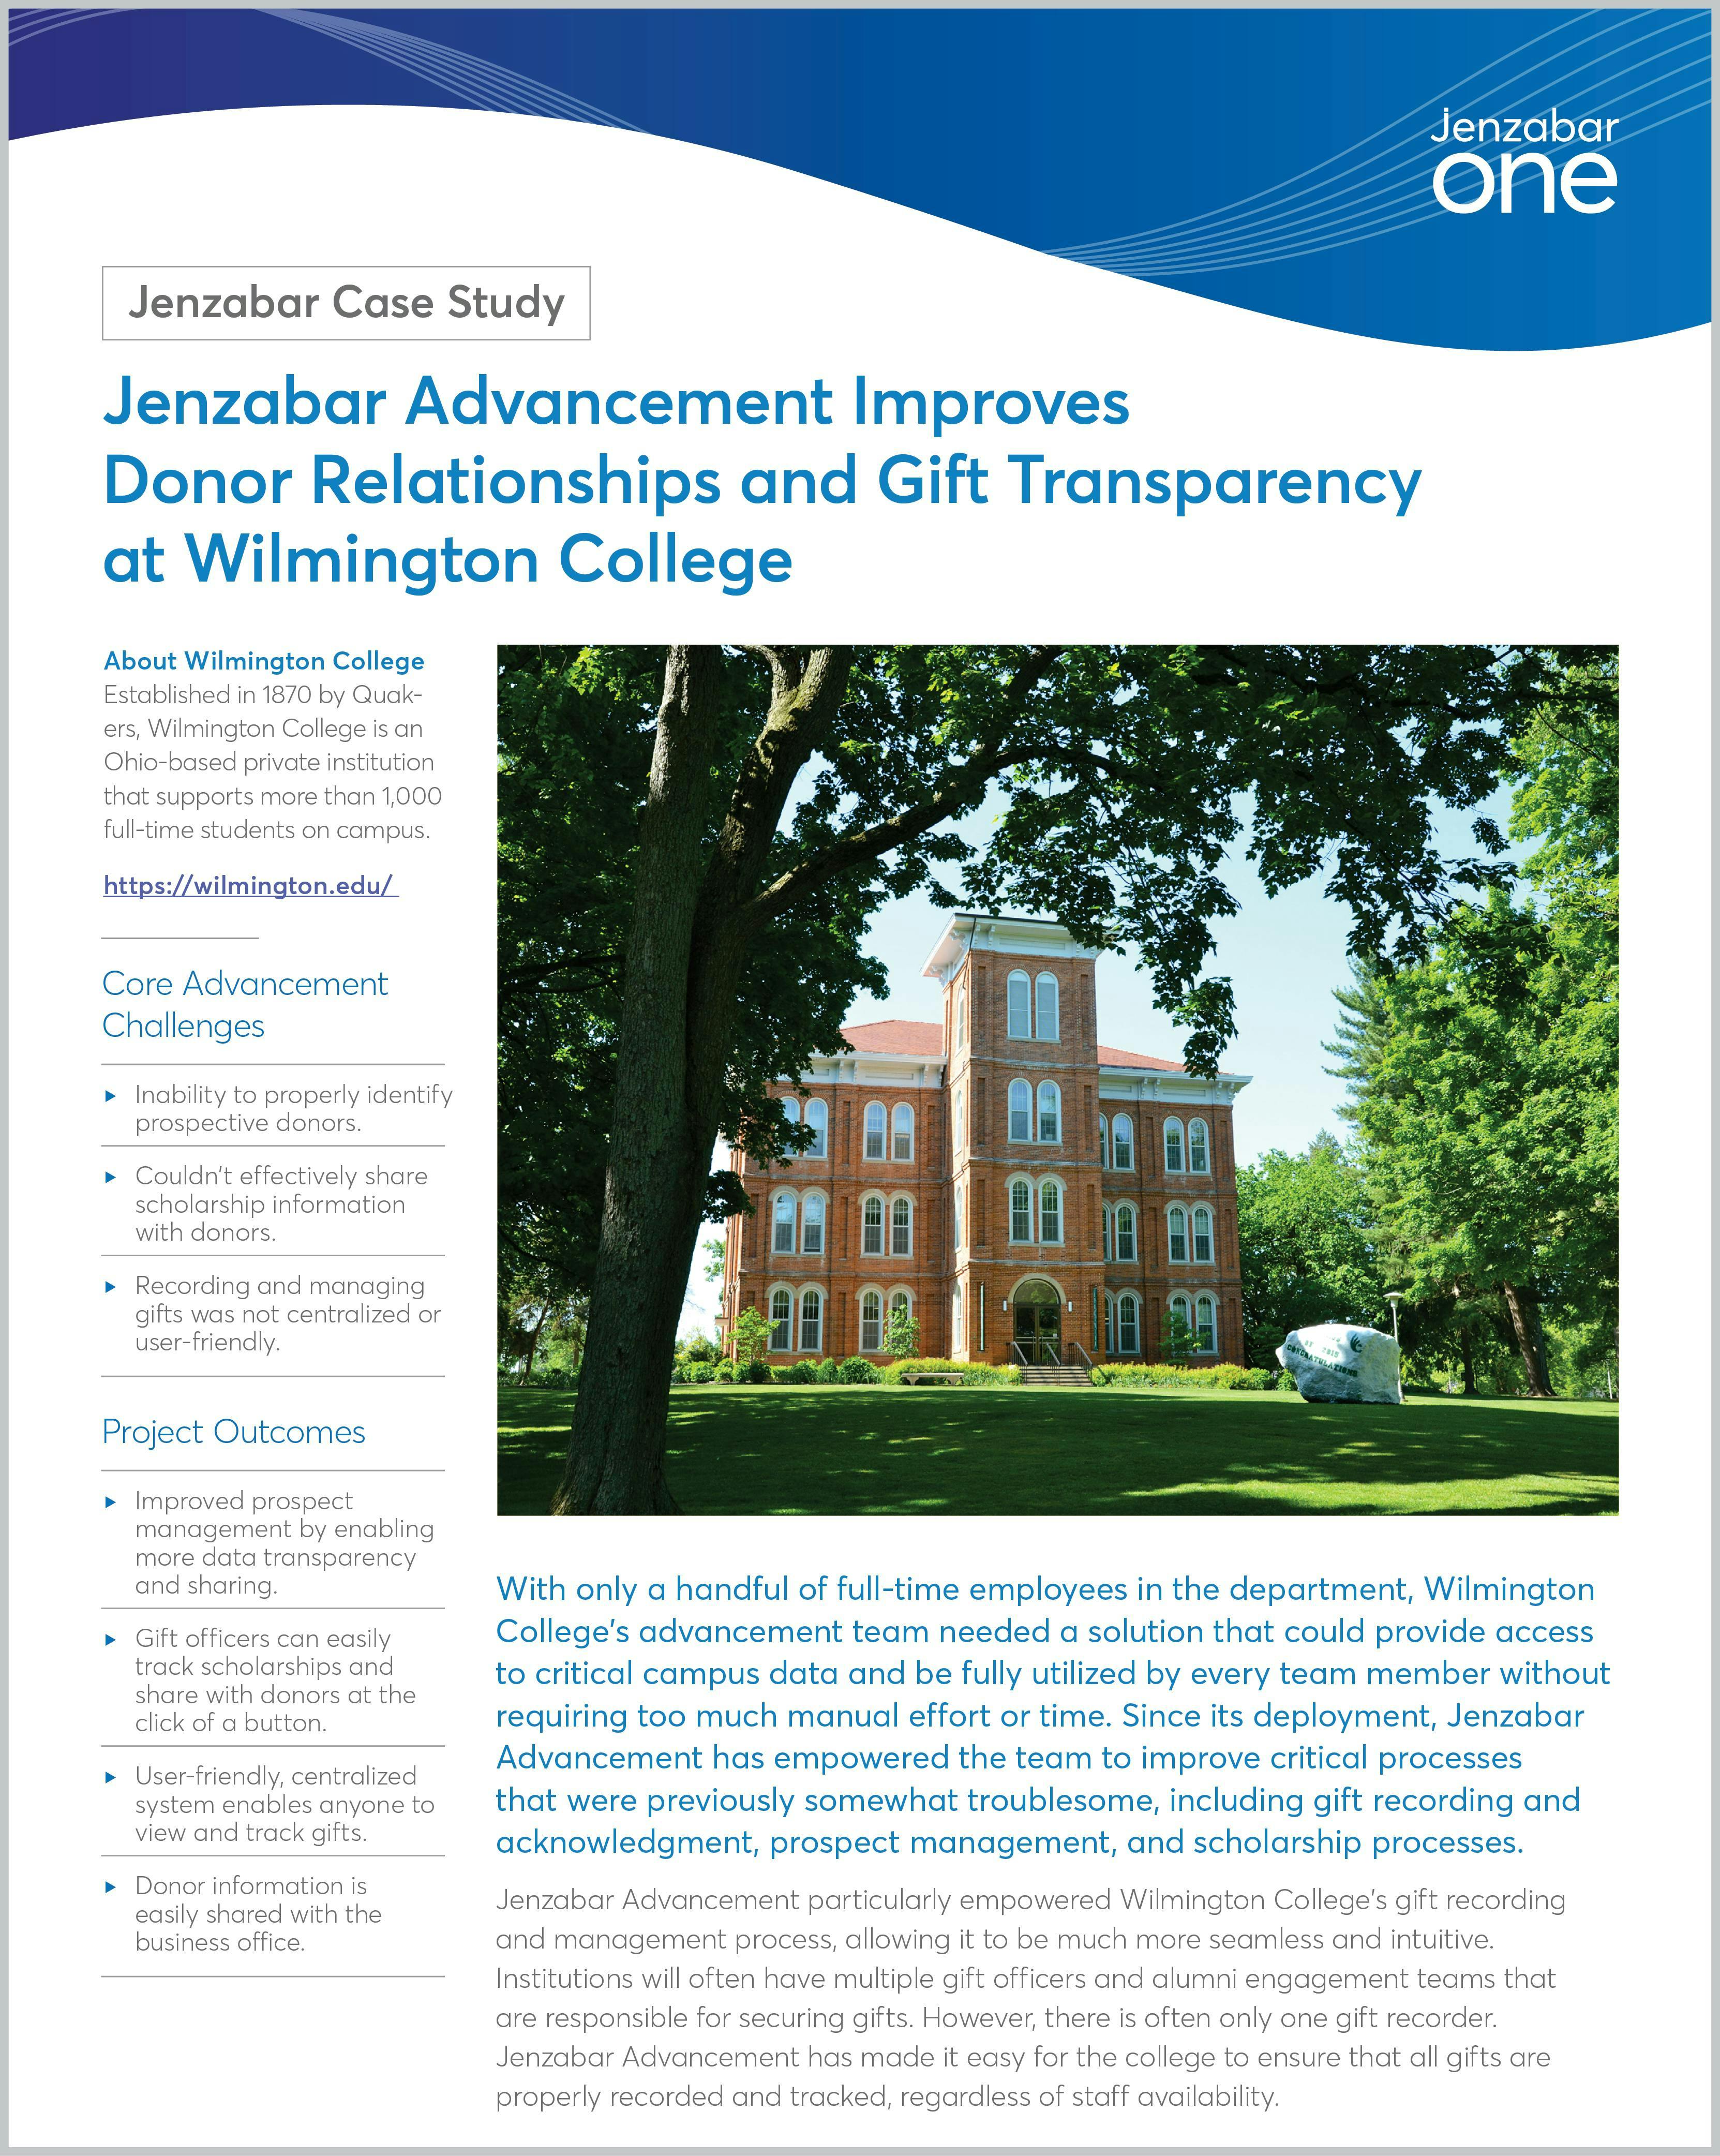 Case Study: Jenzabar Advancement Improves Donor Relationships and Gift Transparency at Wilmington College